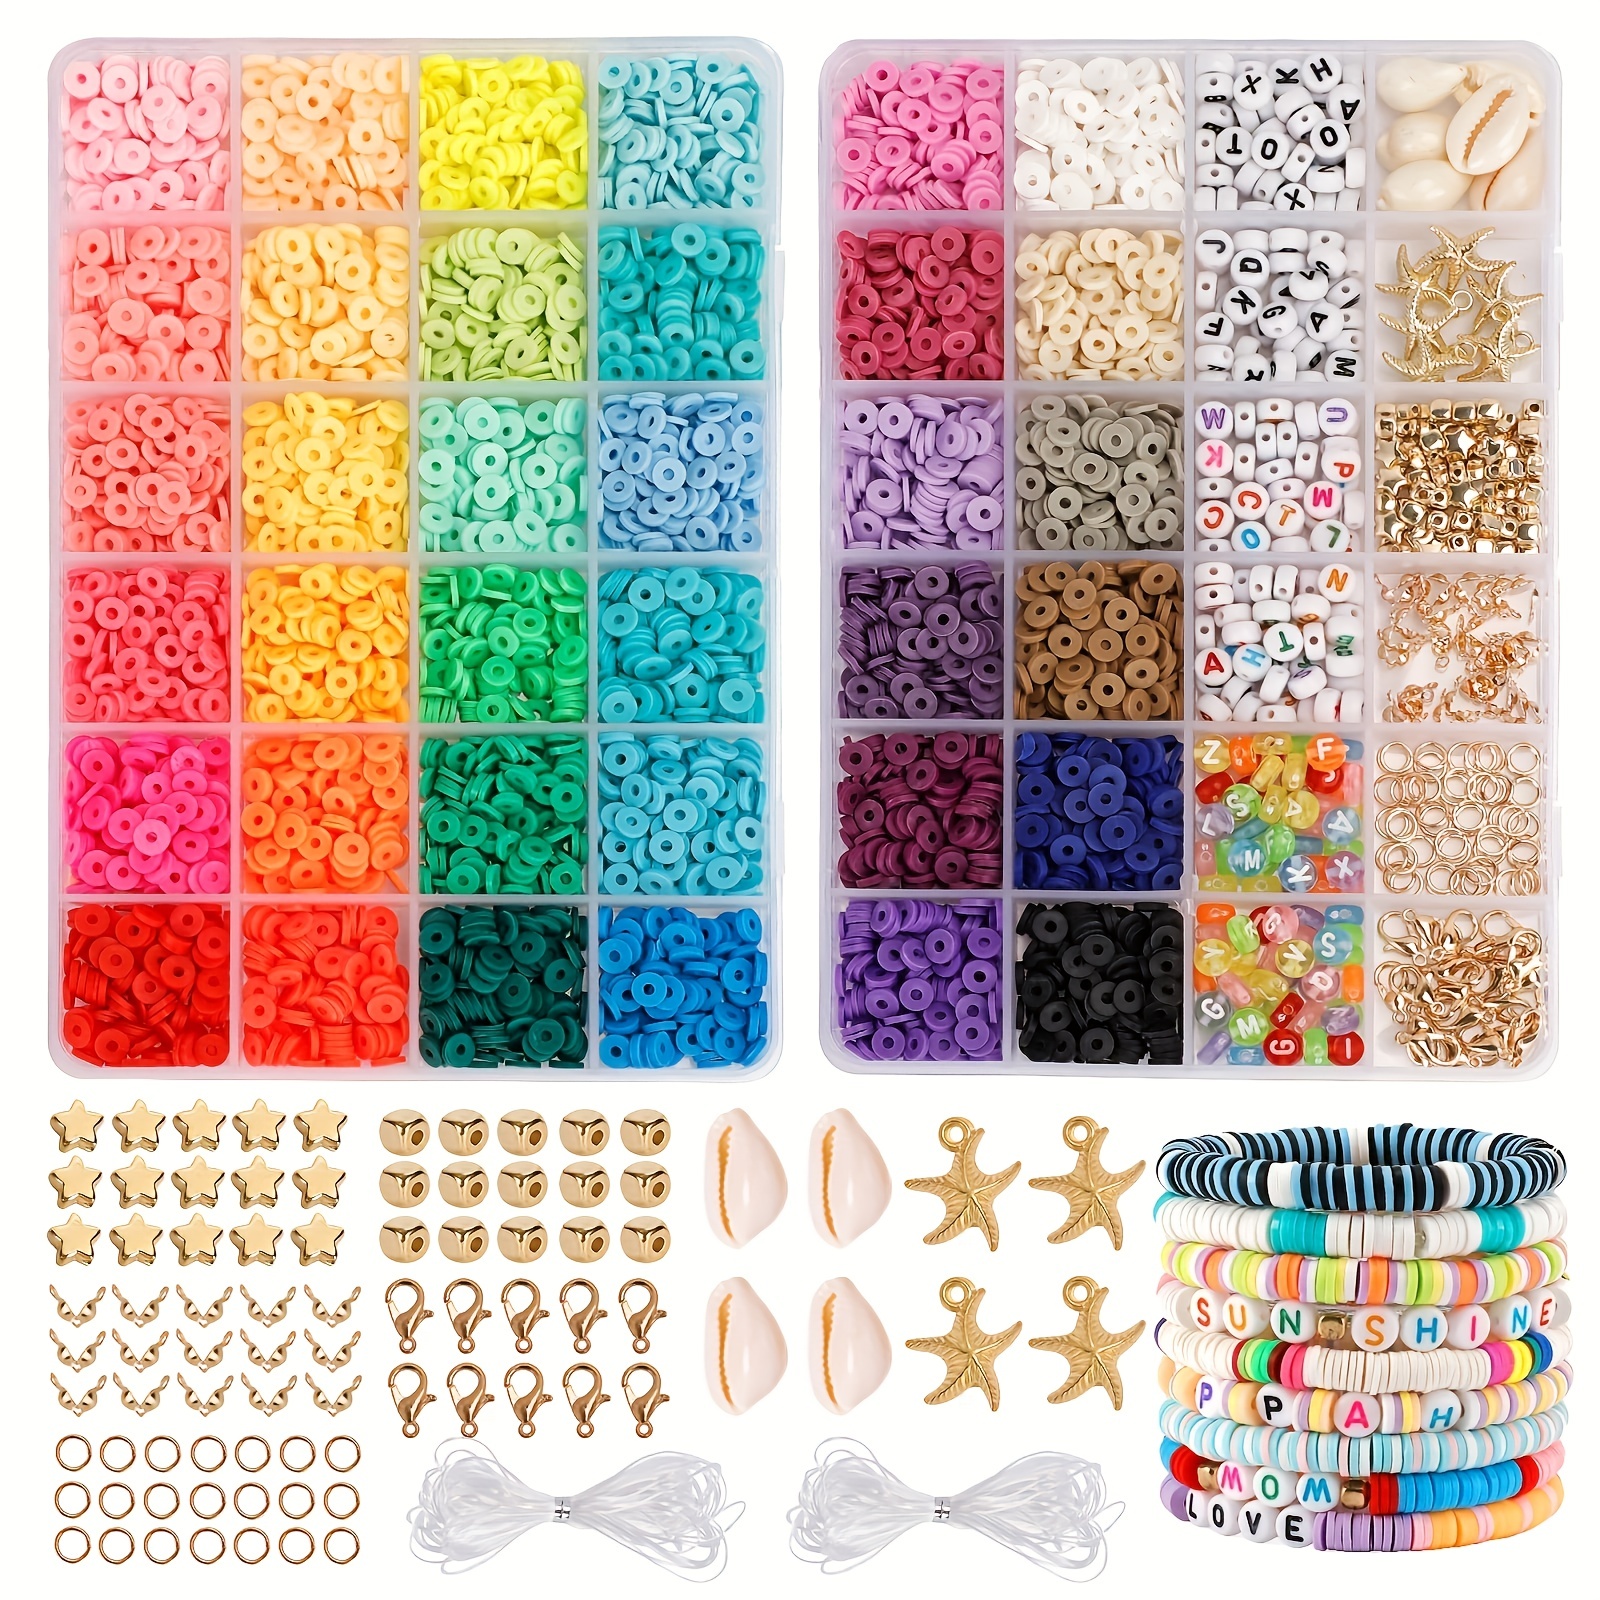 5100 Clay Beads Bead Making Kit, Preppy Flat Spacers For Heishi Polymer  Jewelry With Charms And Elastic Strings Gifts - AliExpress